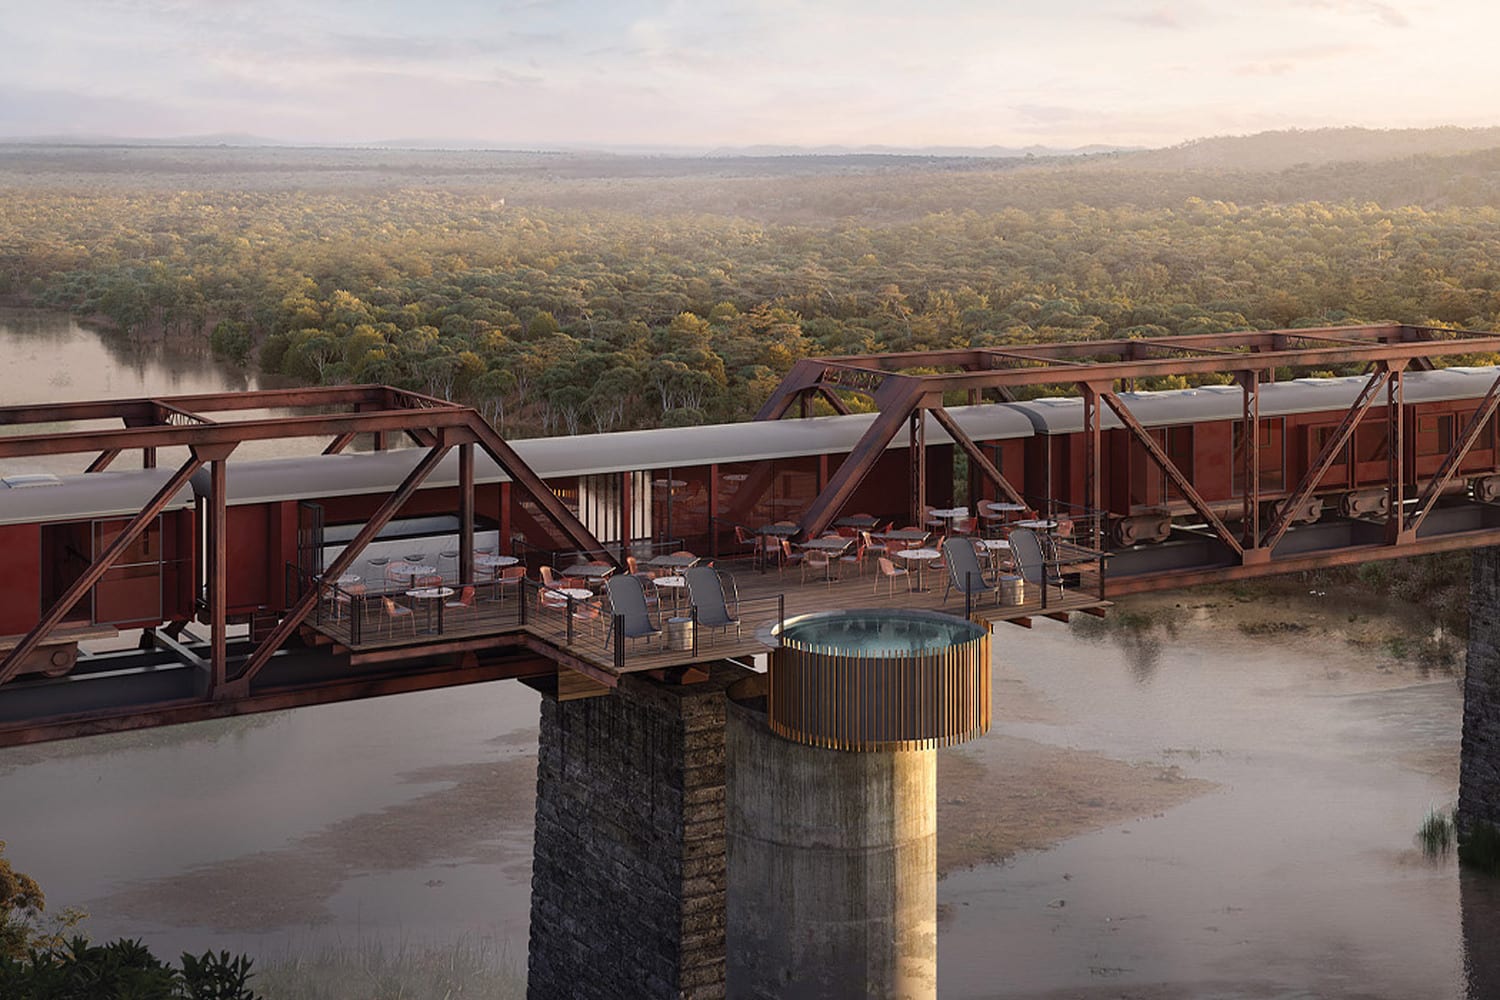 1950s Train Cars to Become Boutique Hotel Above South Africa's Sabie River